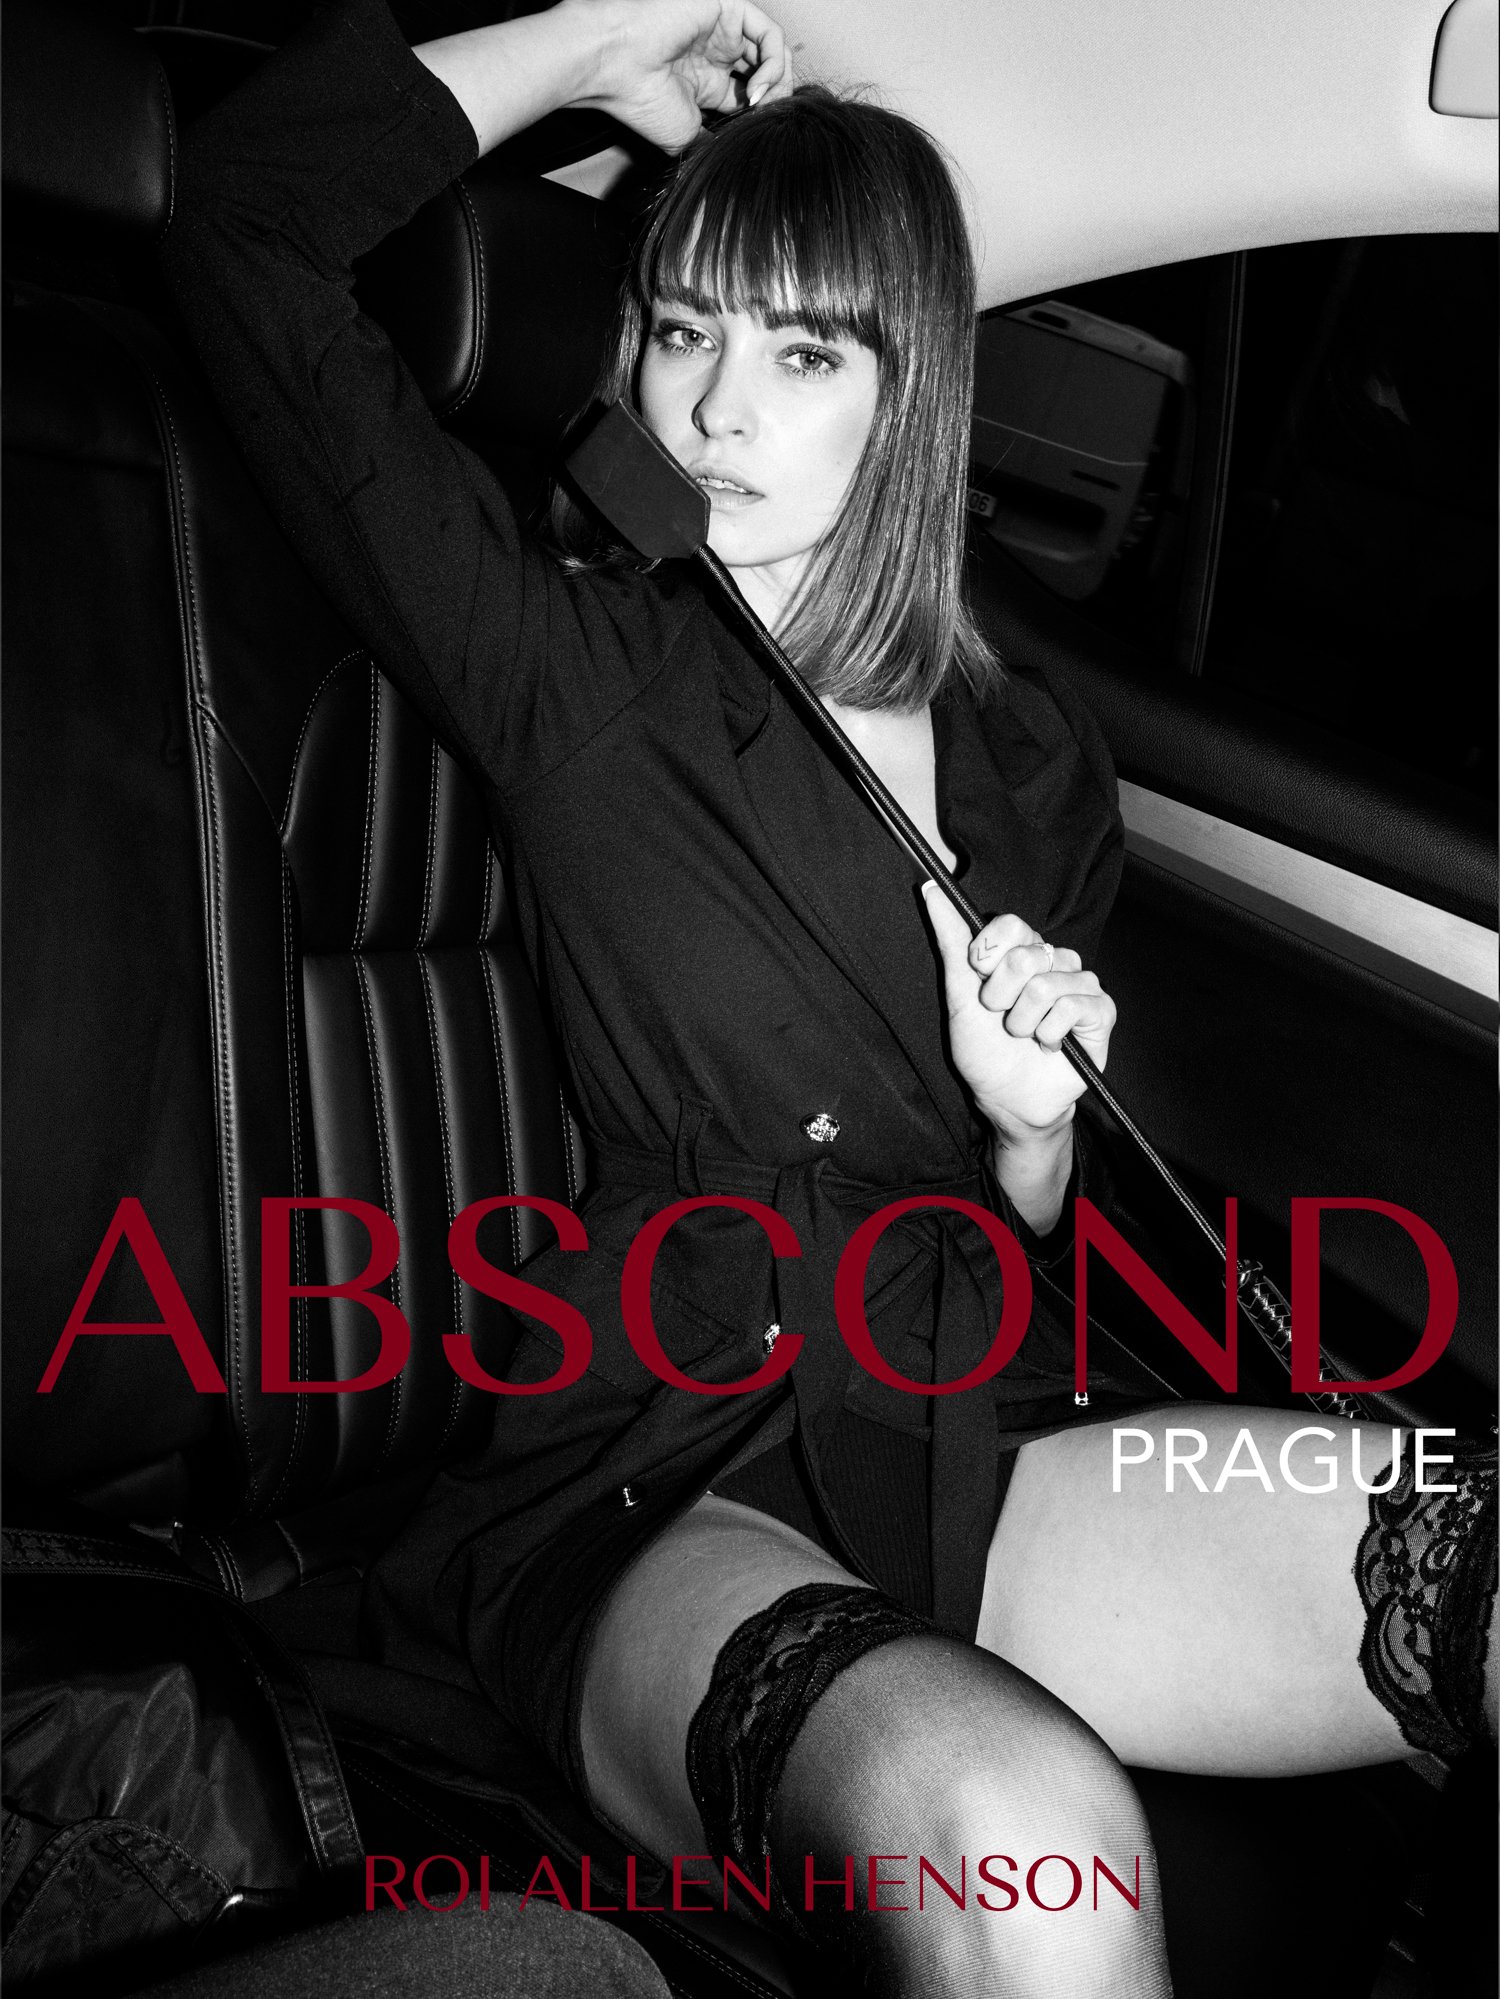 Image of [PRESALE]  ABSCOND - THE SERIES